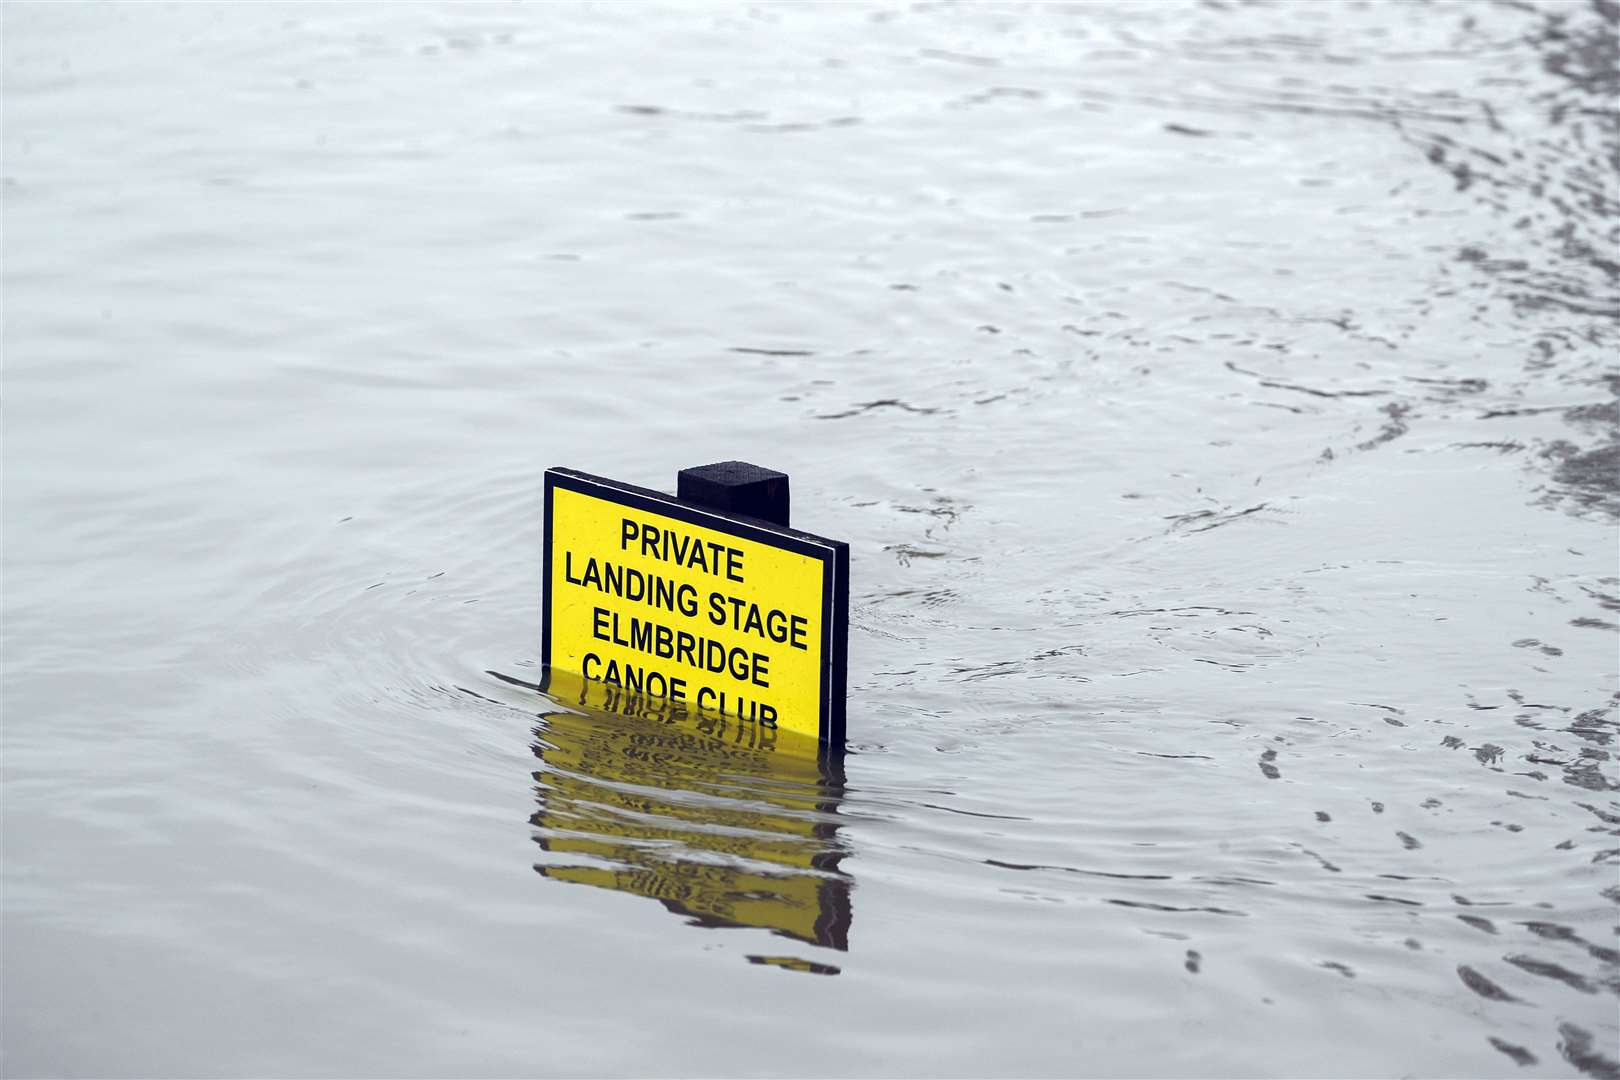 A partly submerged sign in Weybridge, Surrey, on Monday (Steve Parsons/PA)